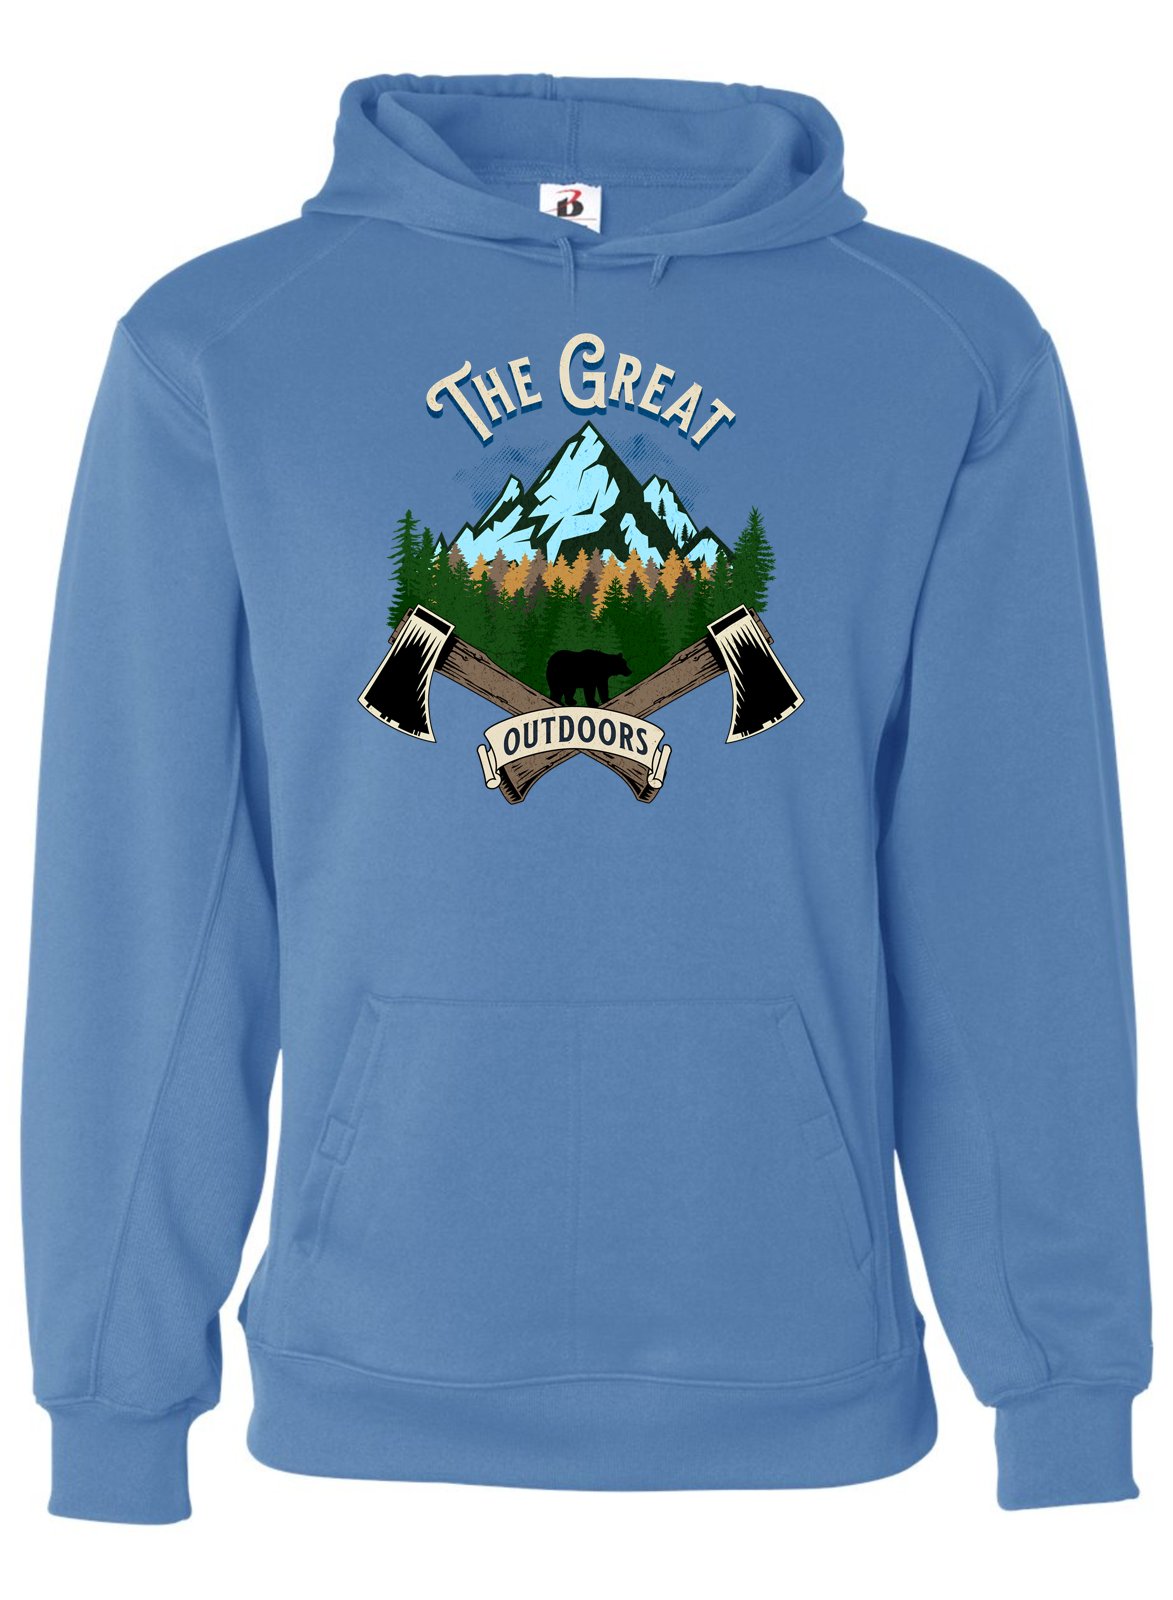 The Great Outdoors Hoodie - Columbia Blue -